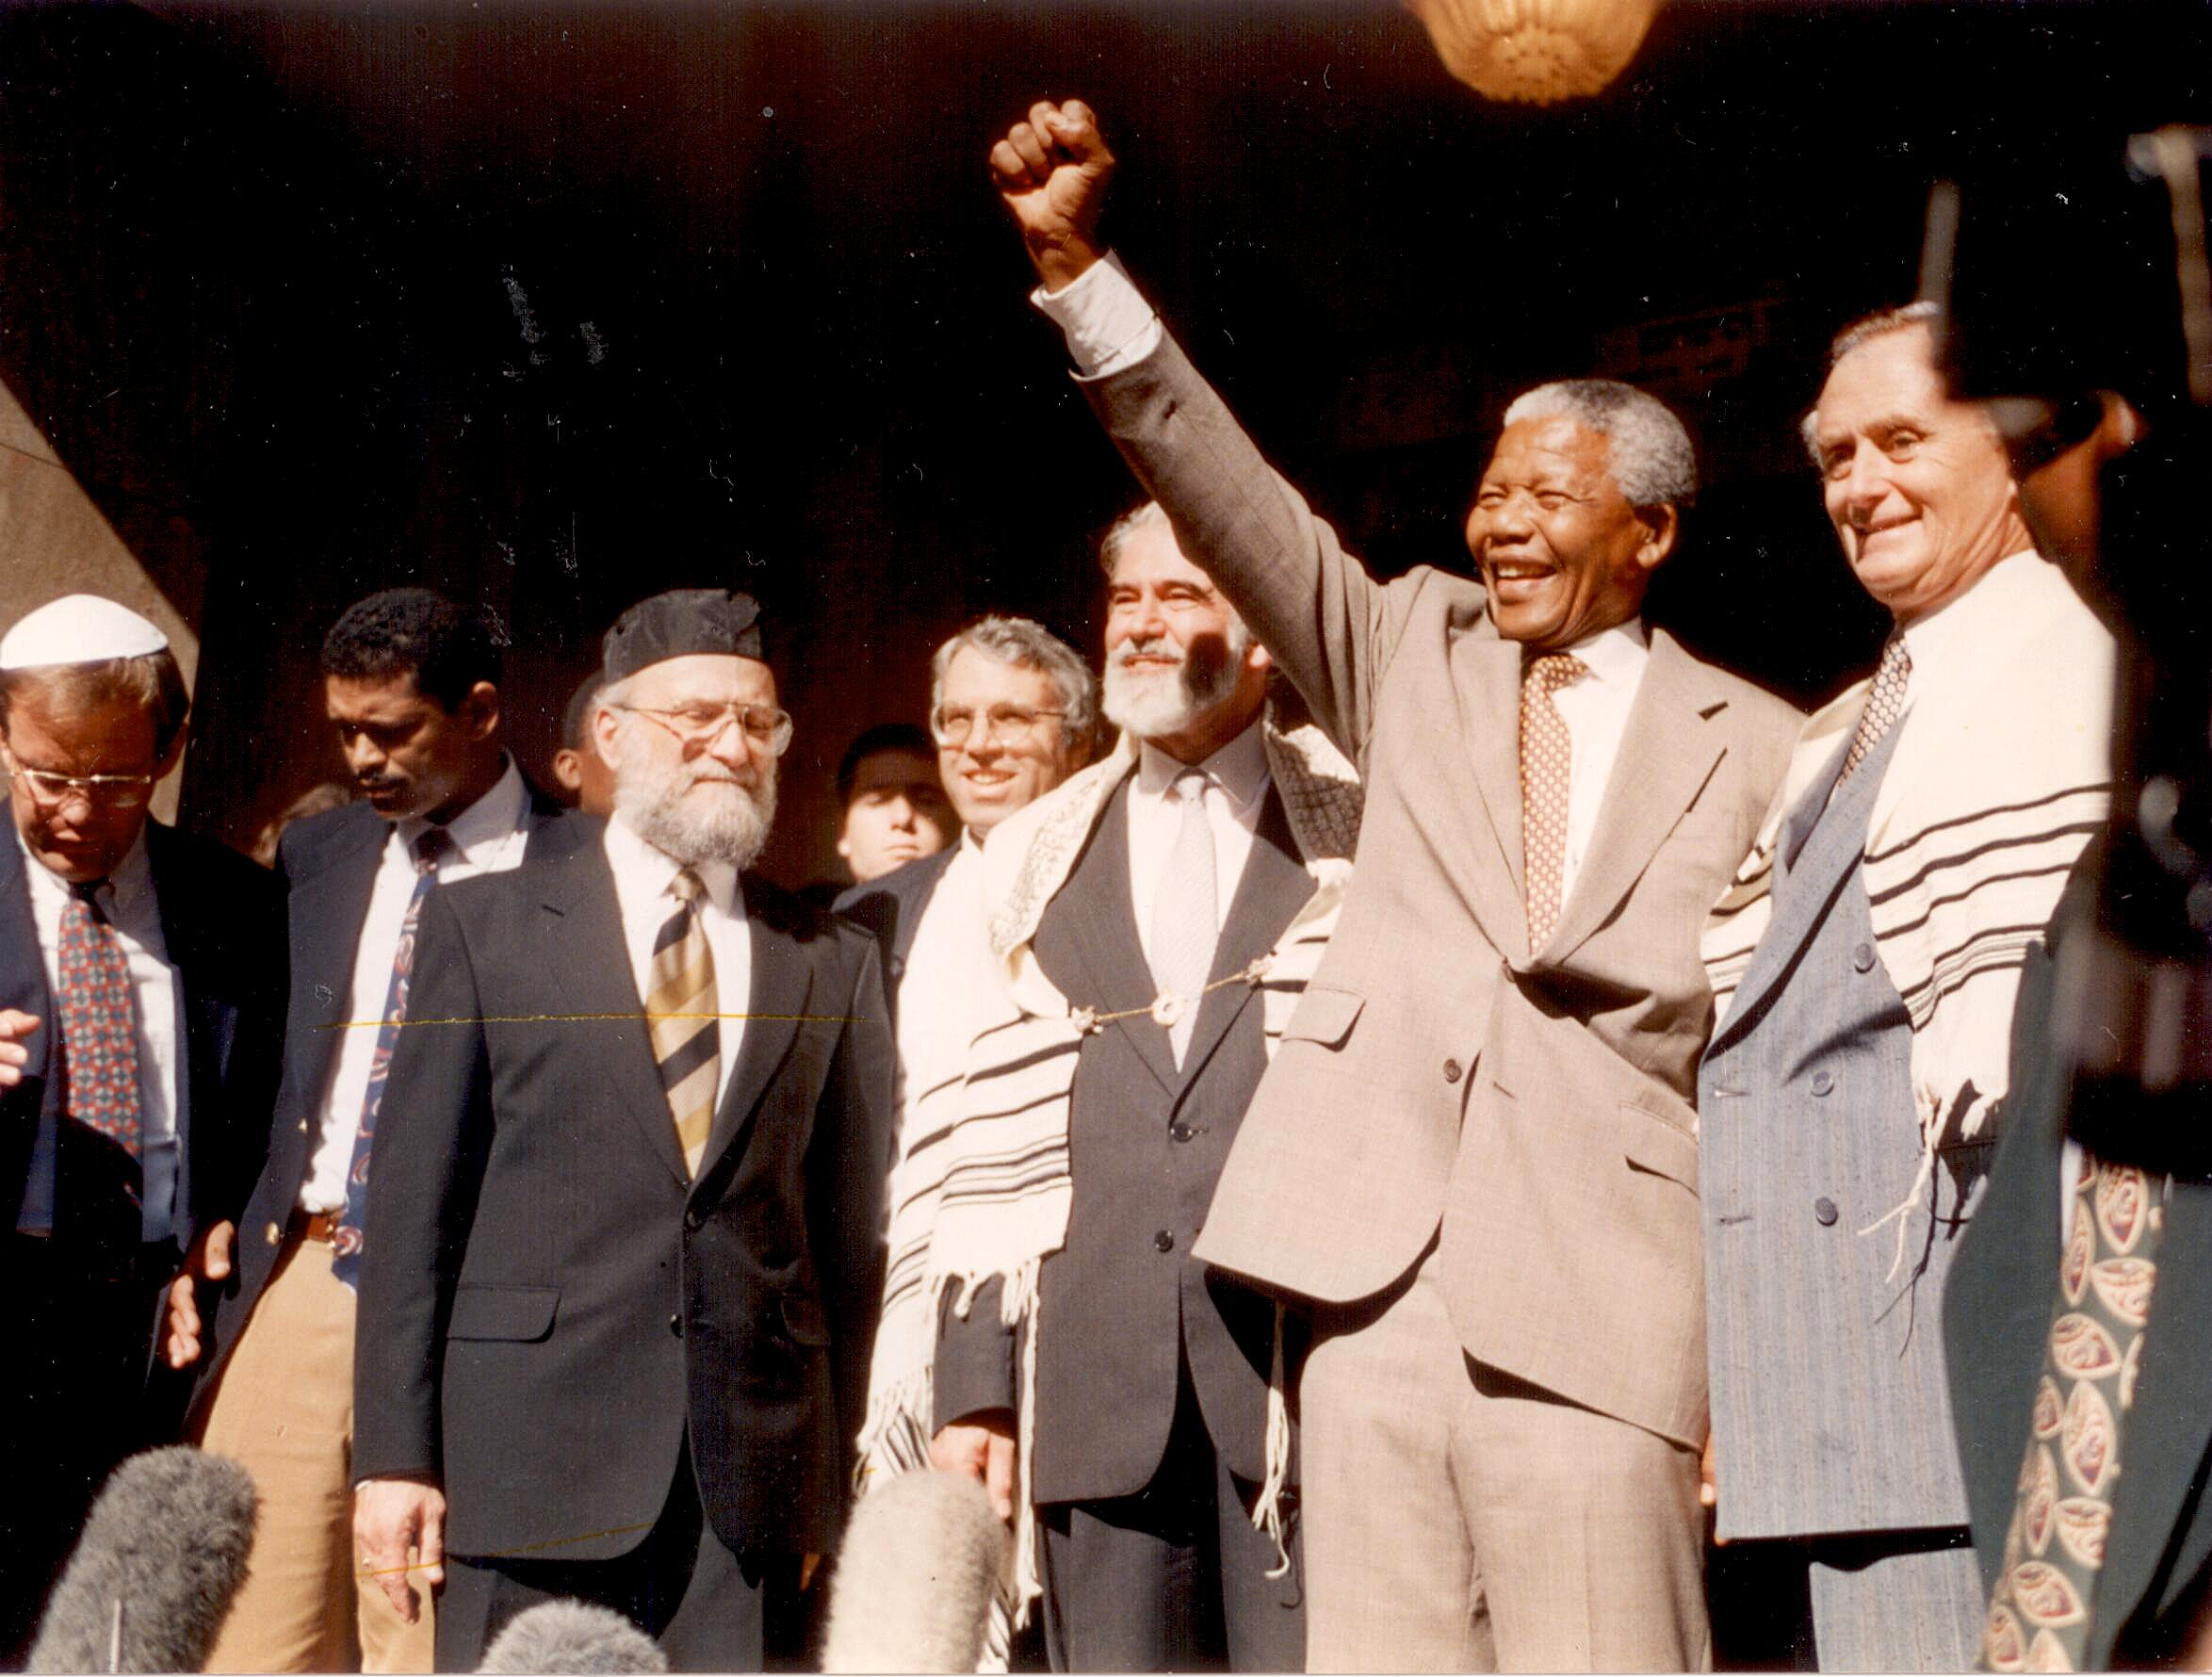 The day Mandela came to shul